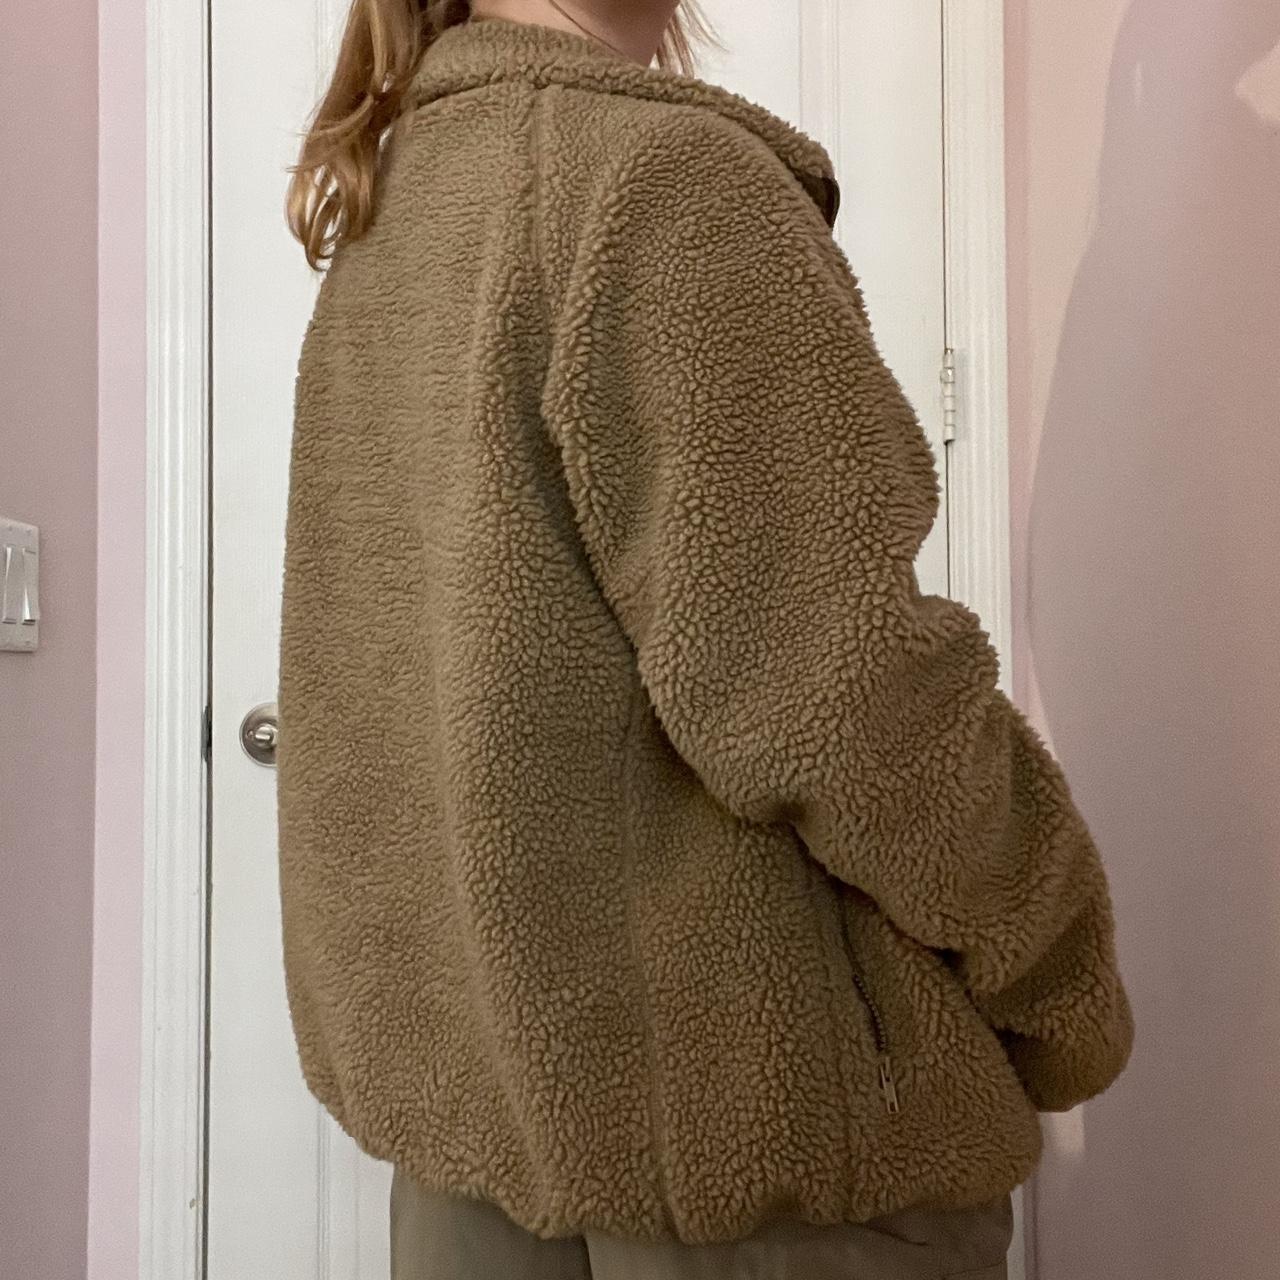 Brandy Melville Women's Brown and Tan Jacket (3)